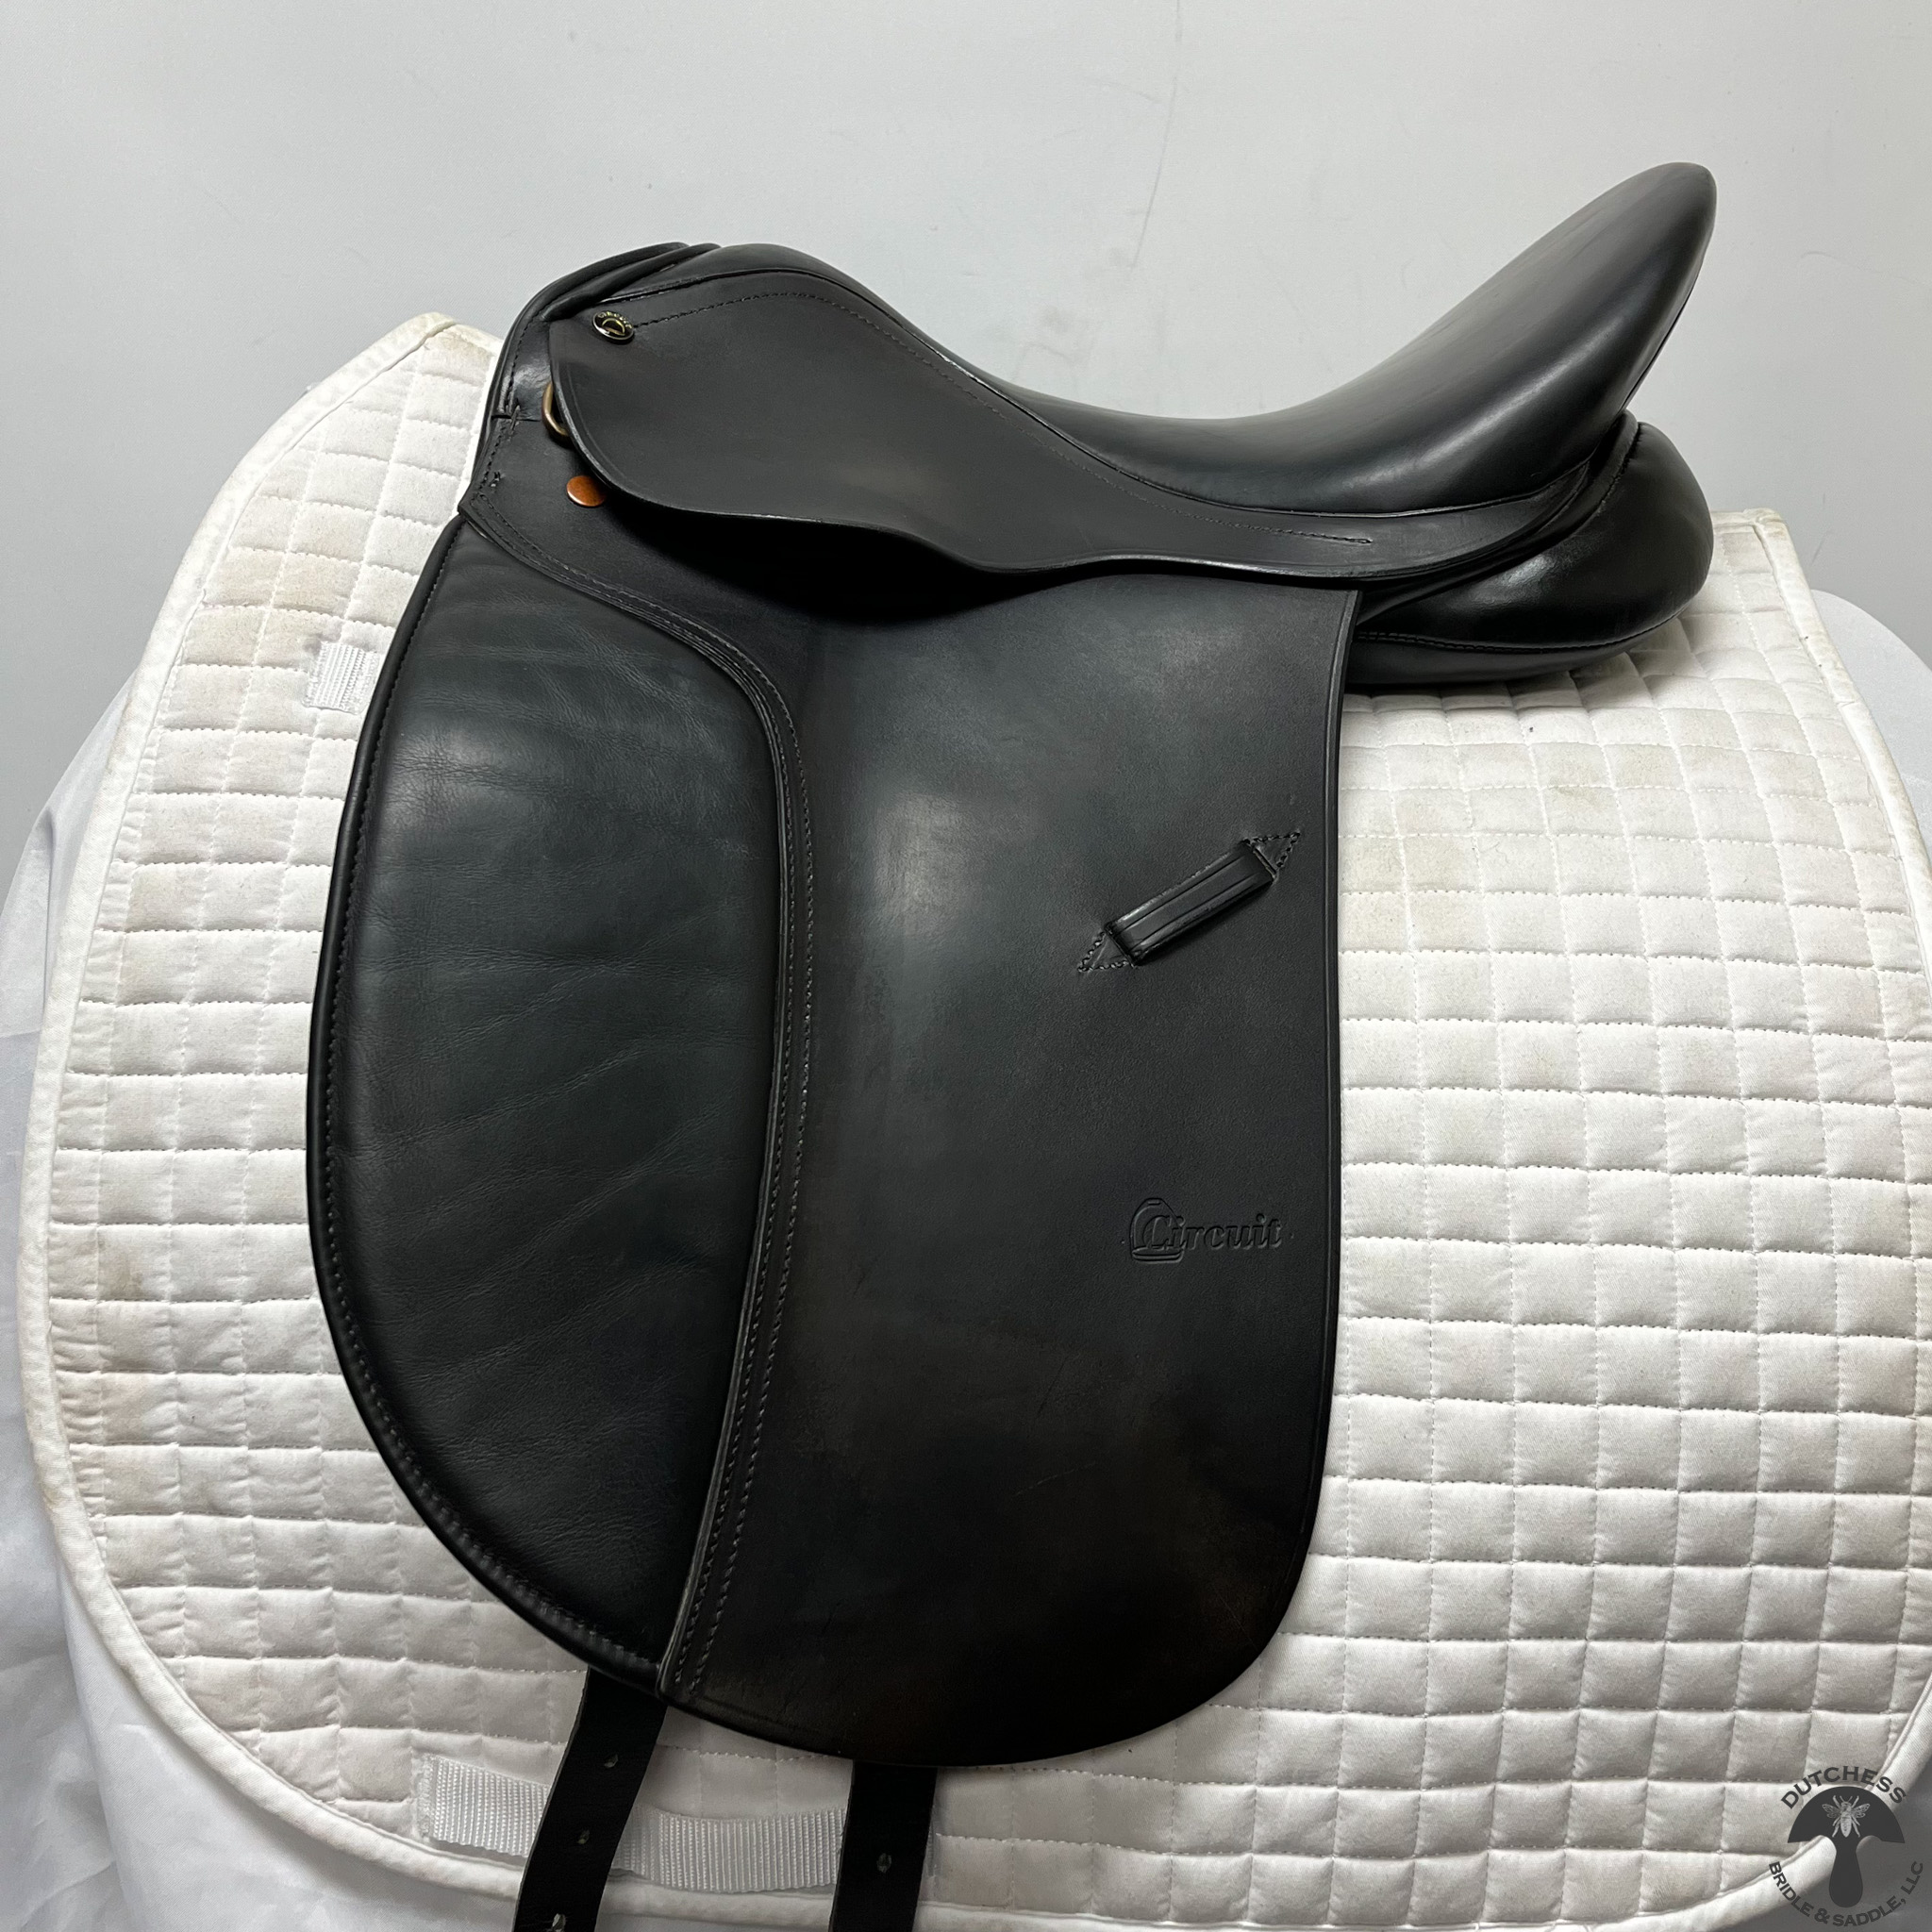 A used Circuit Premiere Dressage Saddle 2178 sitting on top of a white mat.